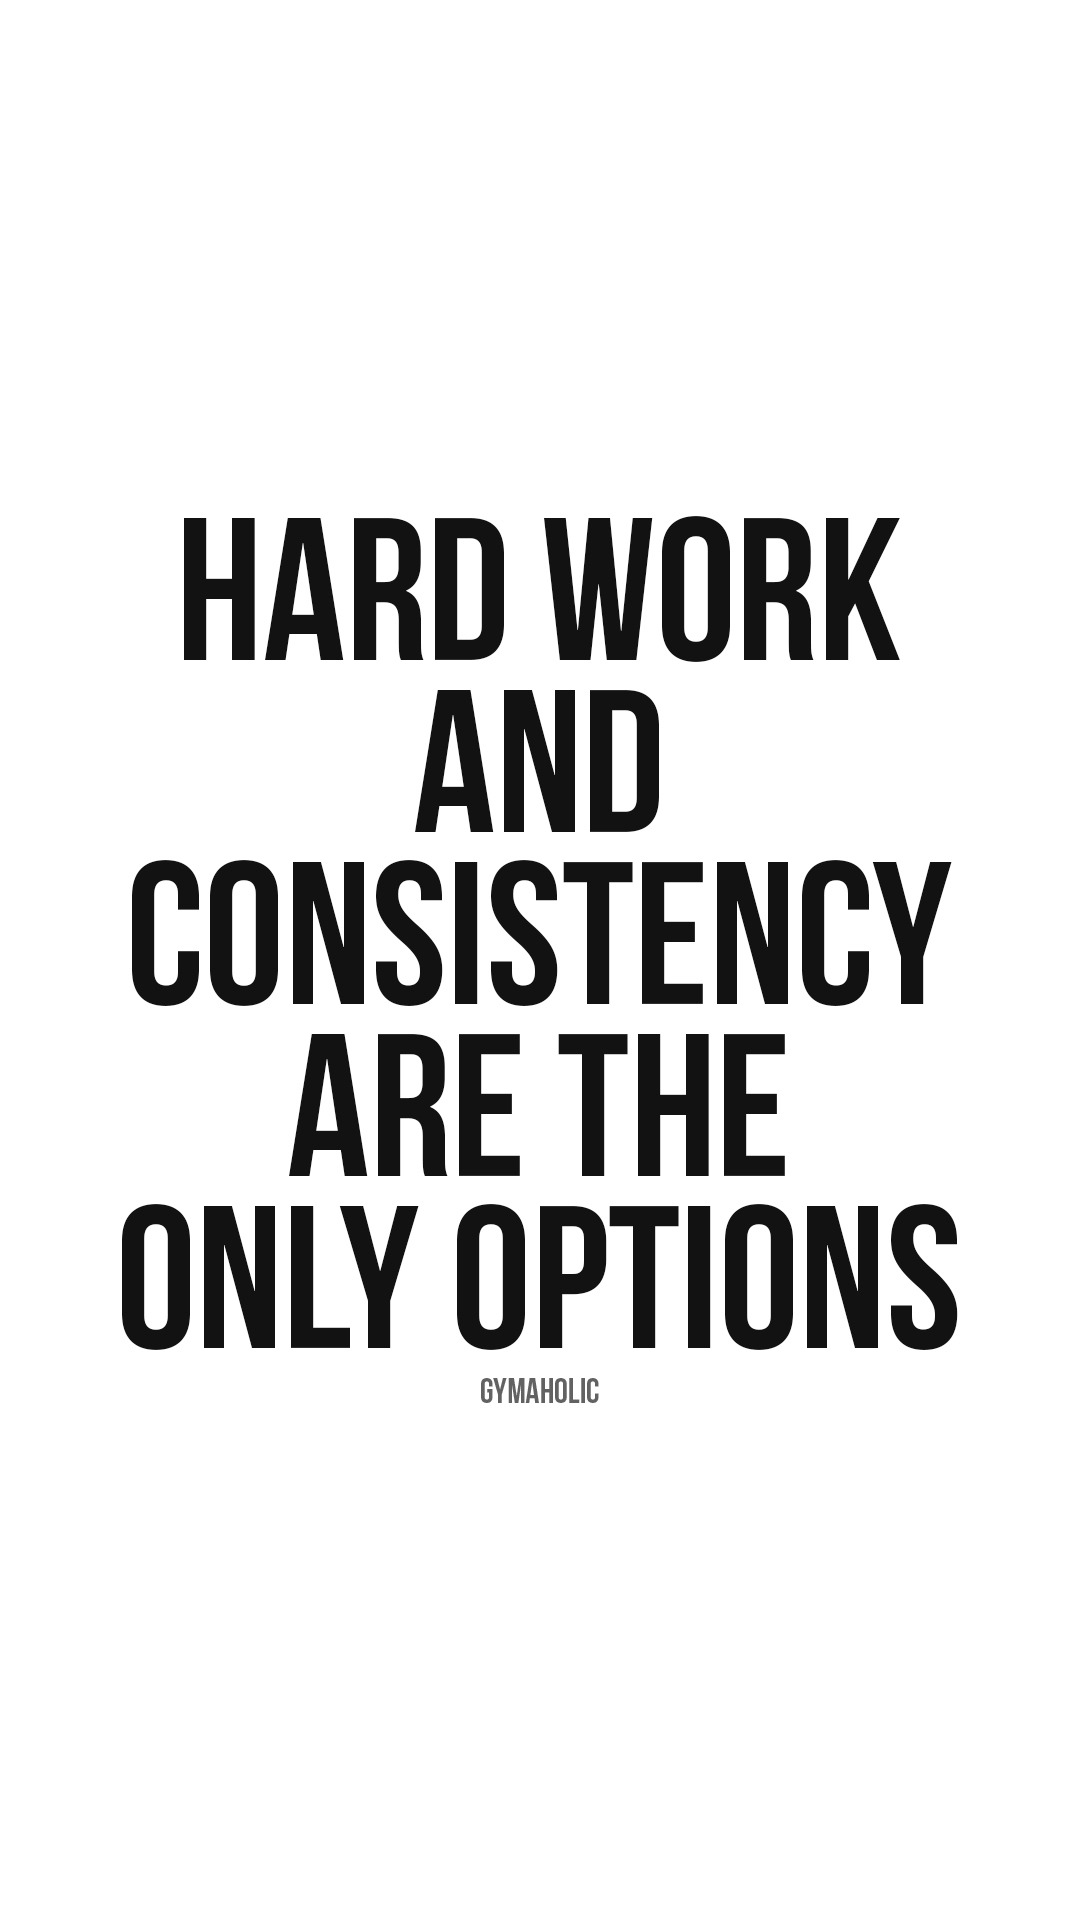 Hard work and consistency are the only options